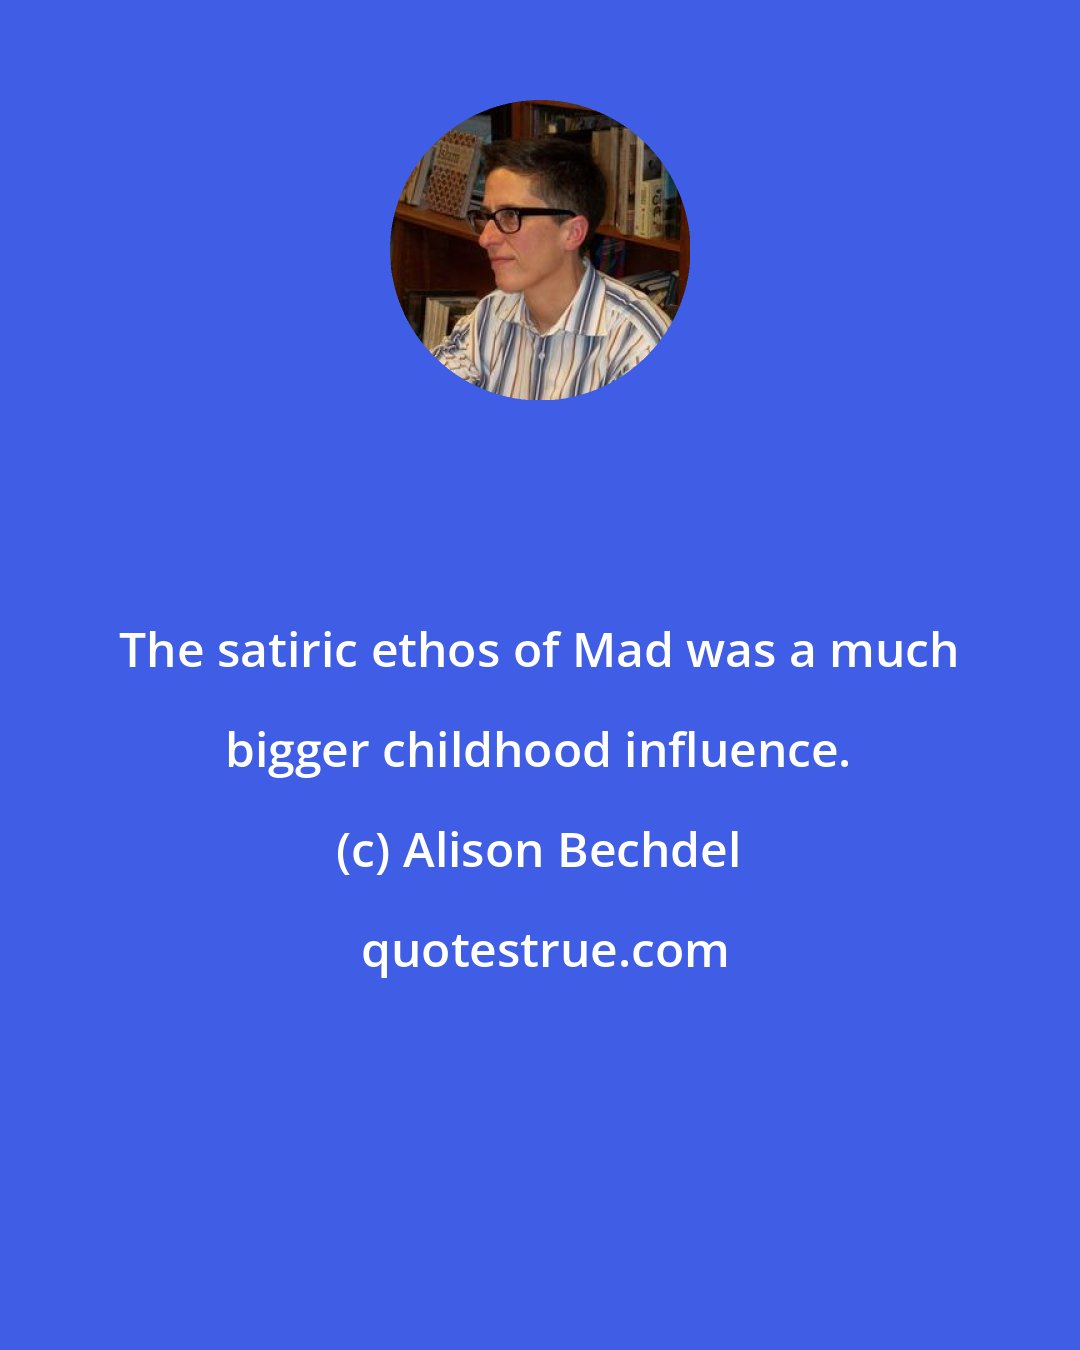 Alison Bechdel: The satiric ethos of Mad was a much bigger childhood influence.